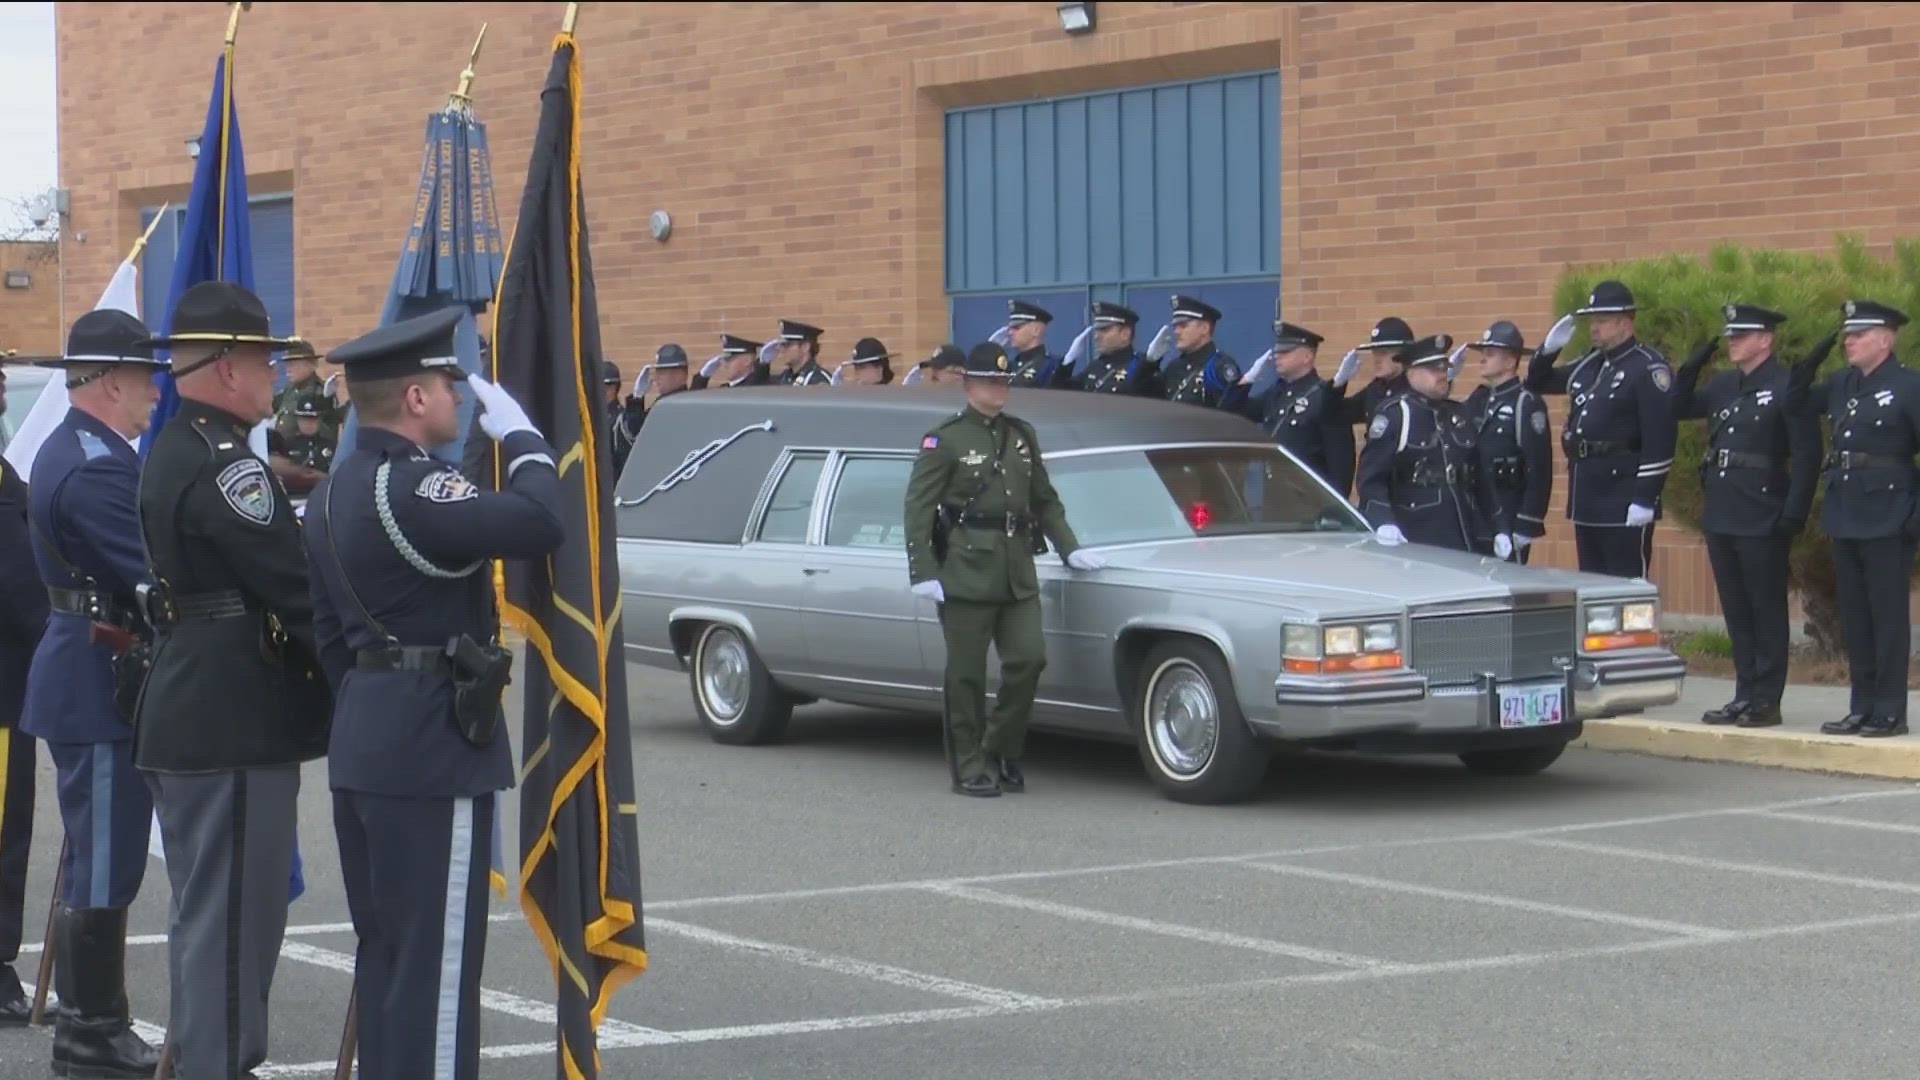 Hundreds of law enforcement officers attended a memorial Saturday in Nyssa for Cpl. Joseph Johnson, who was shot and killed in the line of duty on April 15.